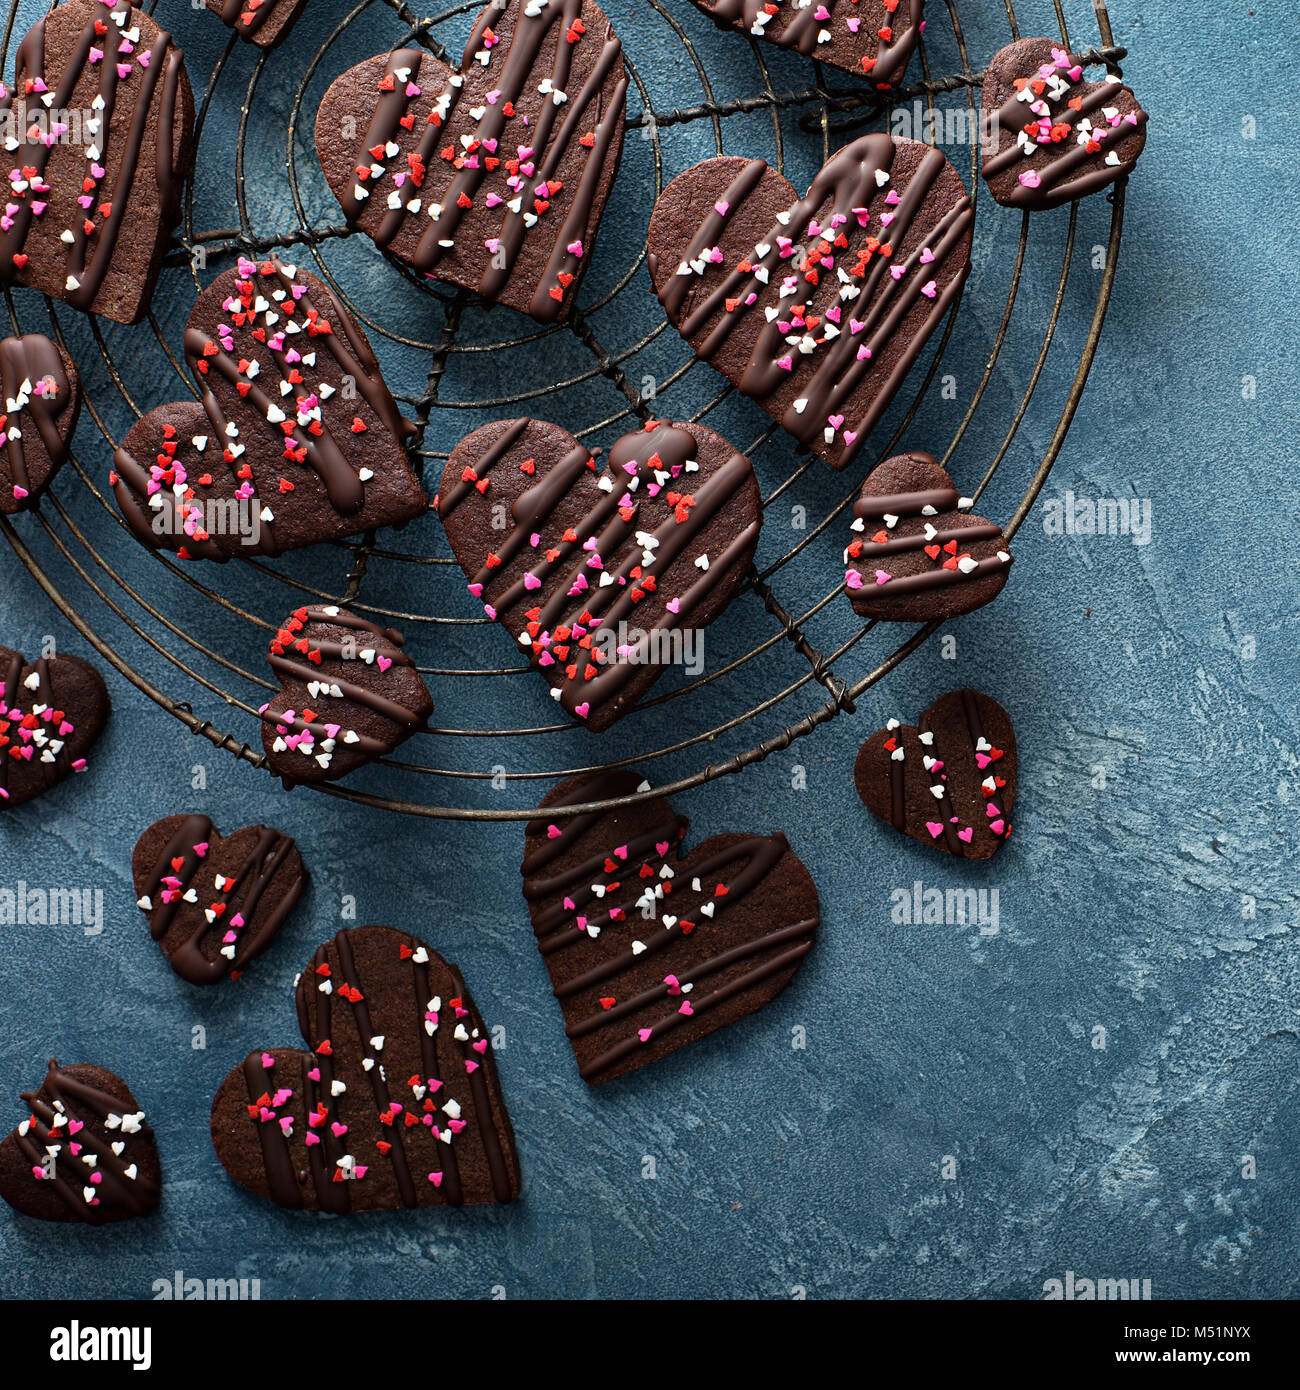 Chocolate hearts cookies with sprinkles for Valentines Day Stock Photo